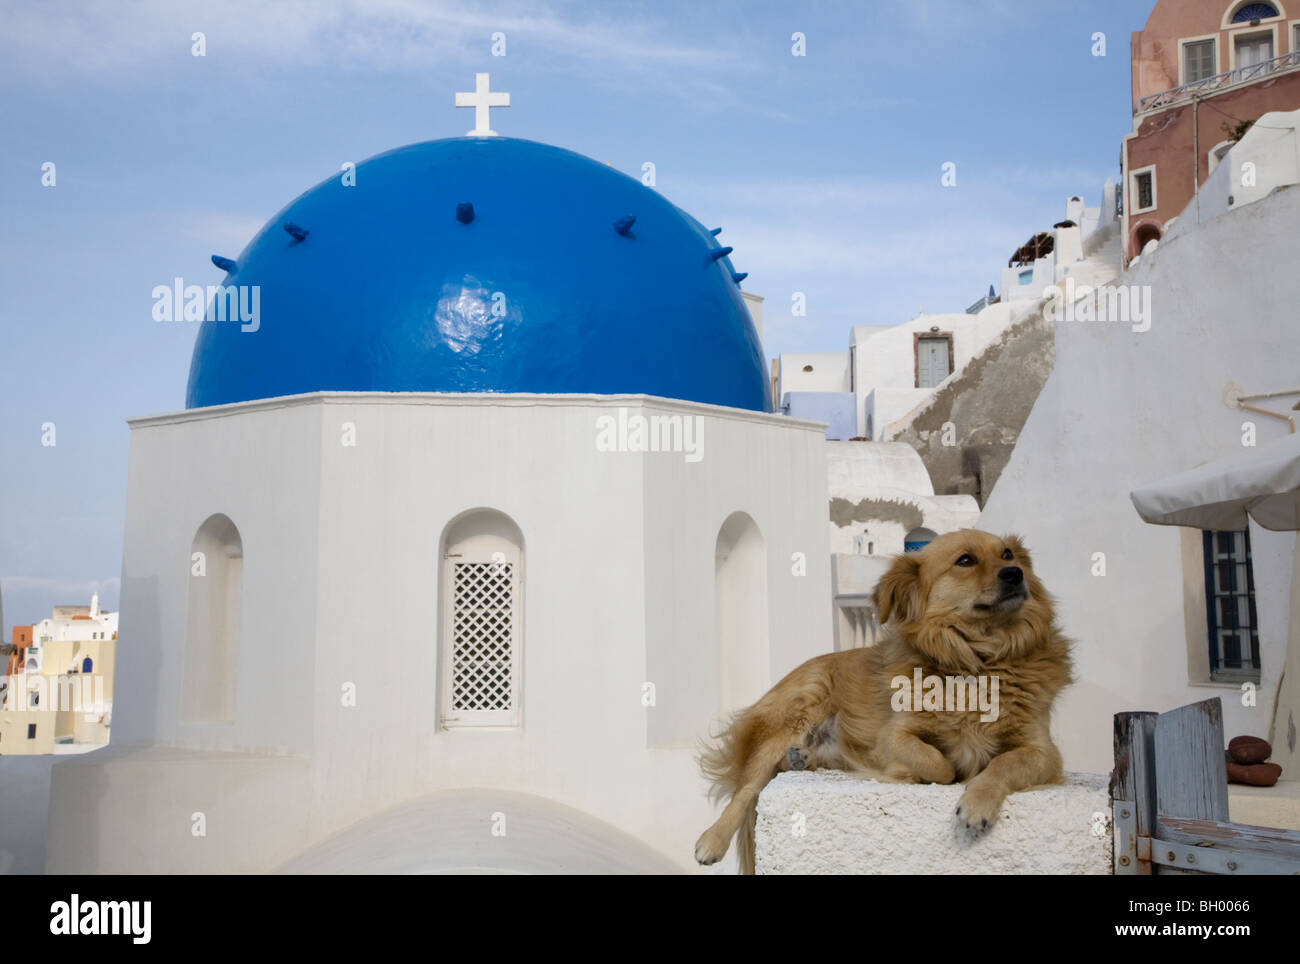 Pet dog on white gatepost in front of blue-domed church in a Greek Island village, Oia, Santorini. Stock Photo